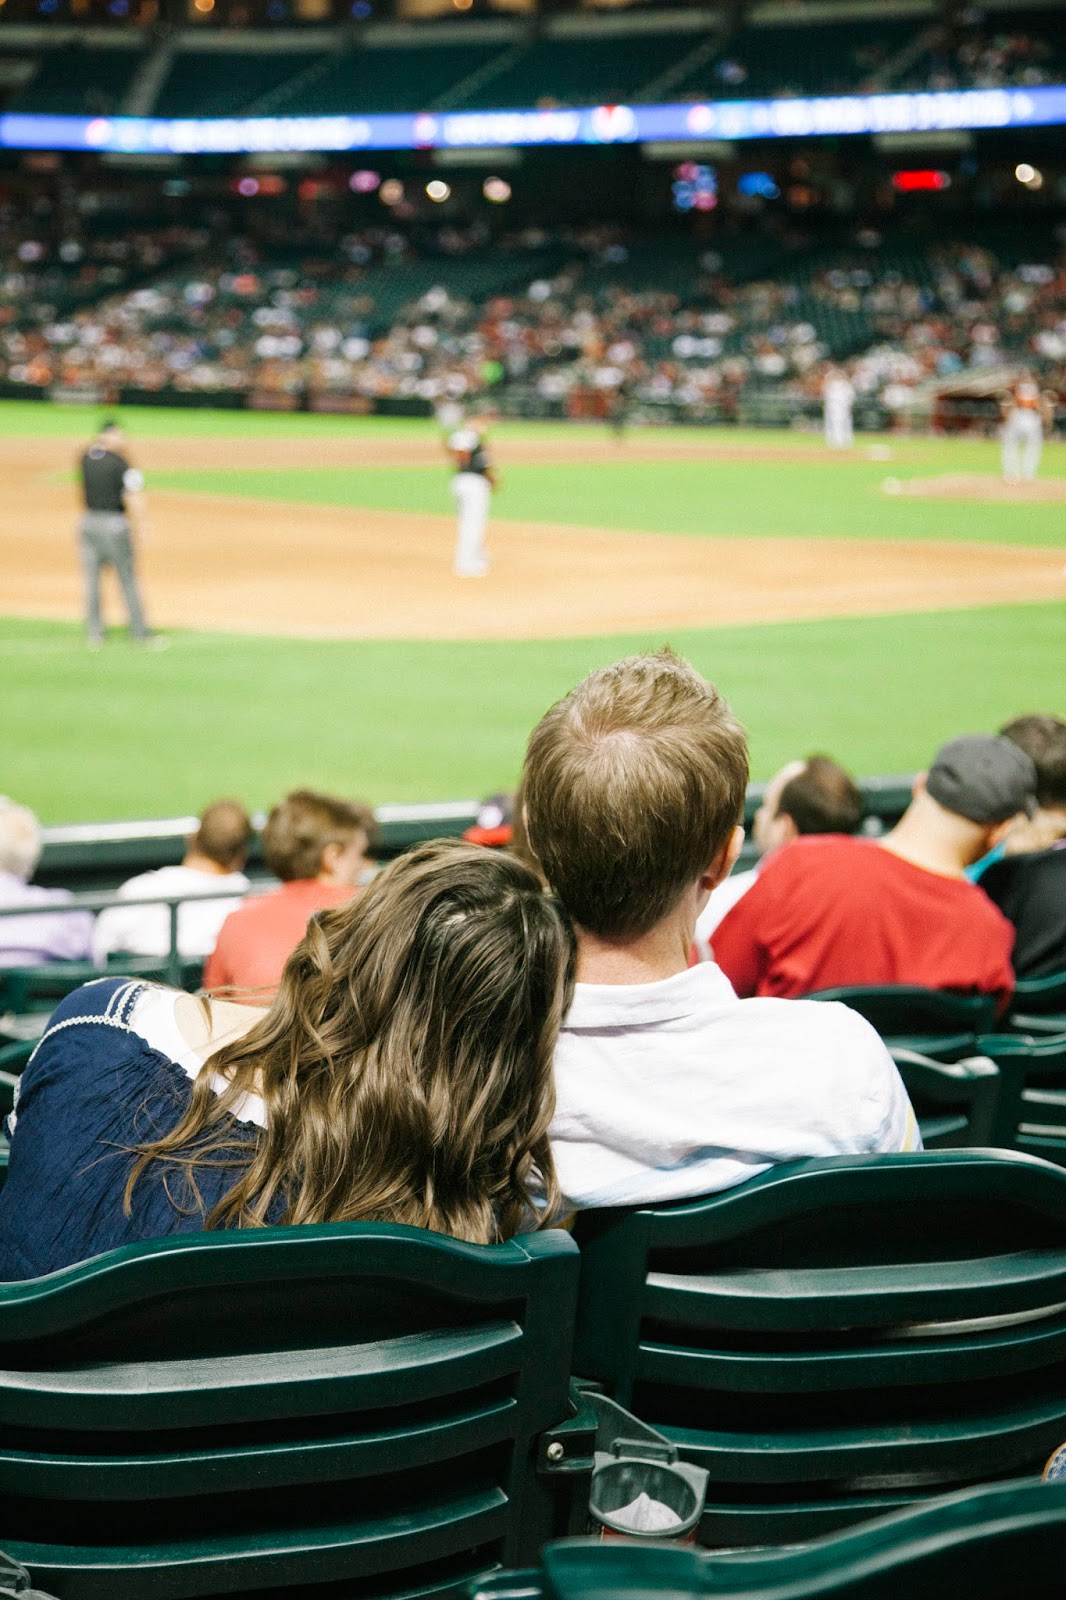 D-backs Major League Baseball Game – Captured by Photography Hill